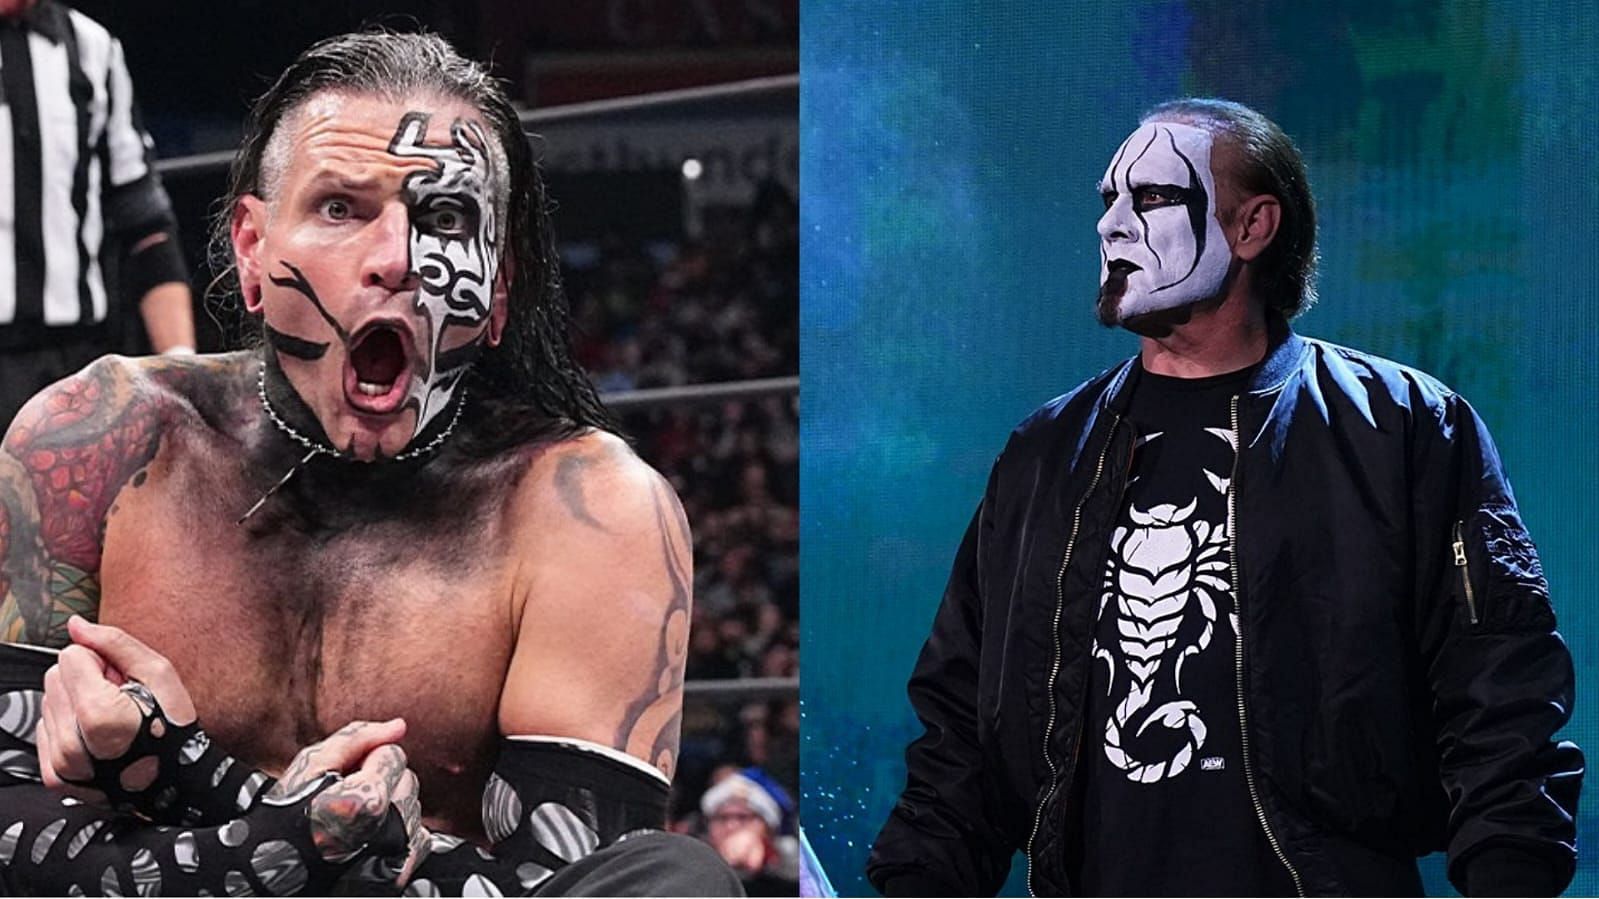 Jeff Hardy and Sting are former WWE Superstars